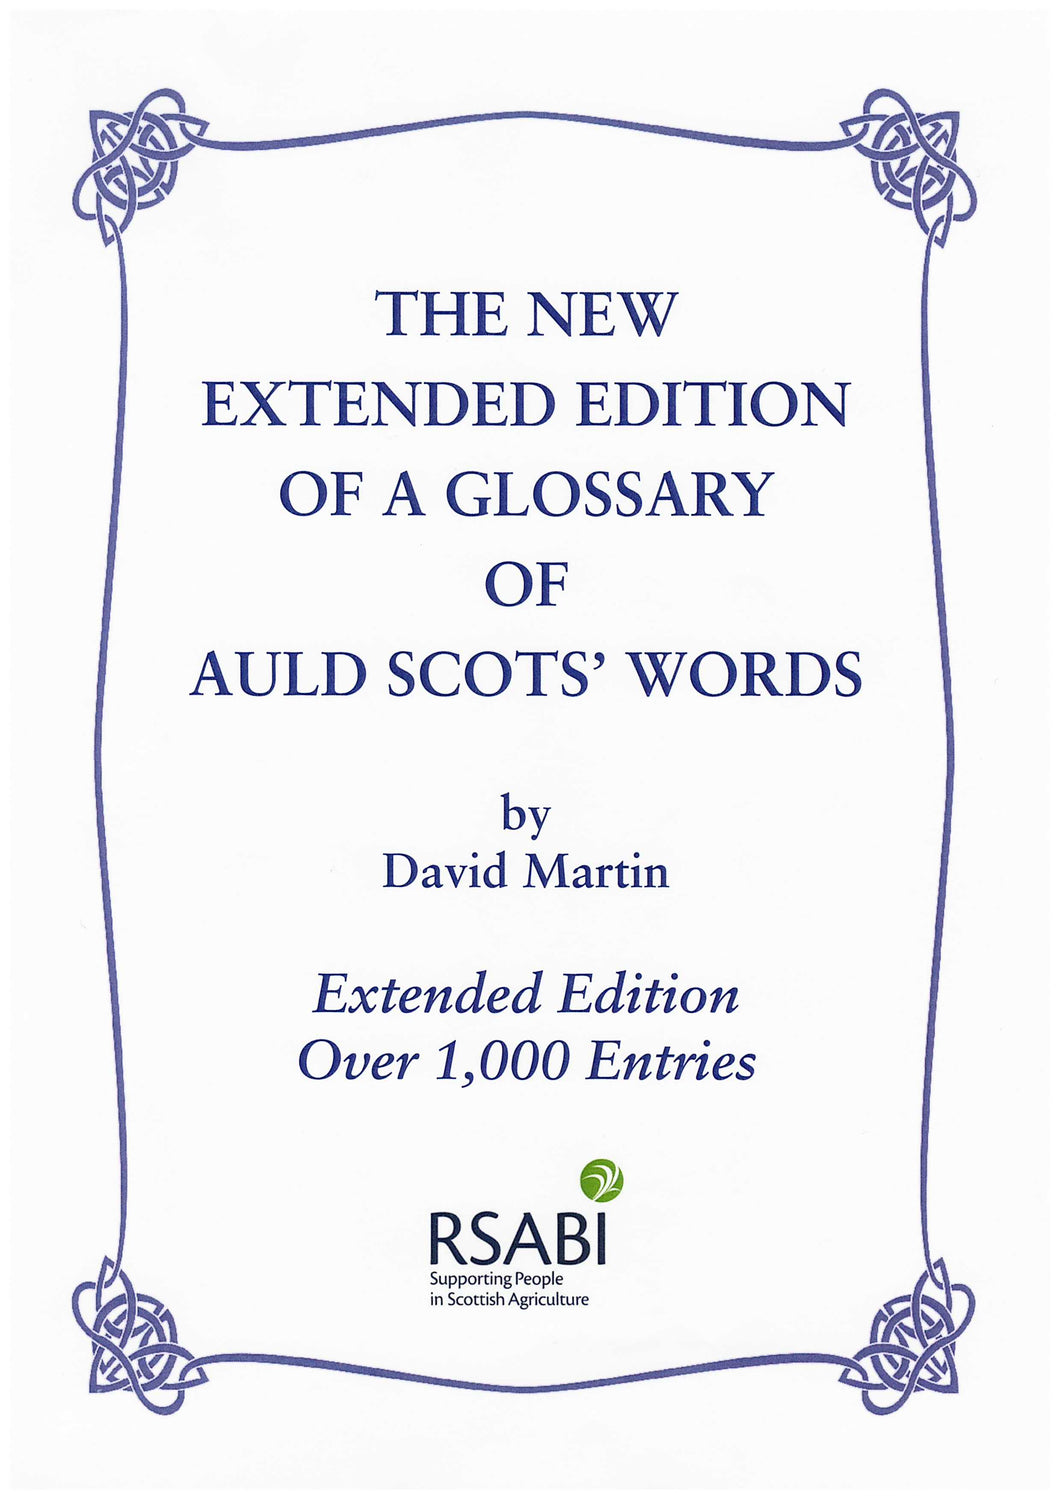 A Glossary of Auld Scots' Words - extended edition